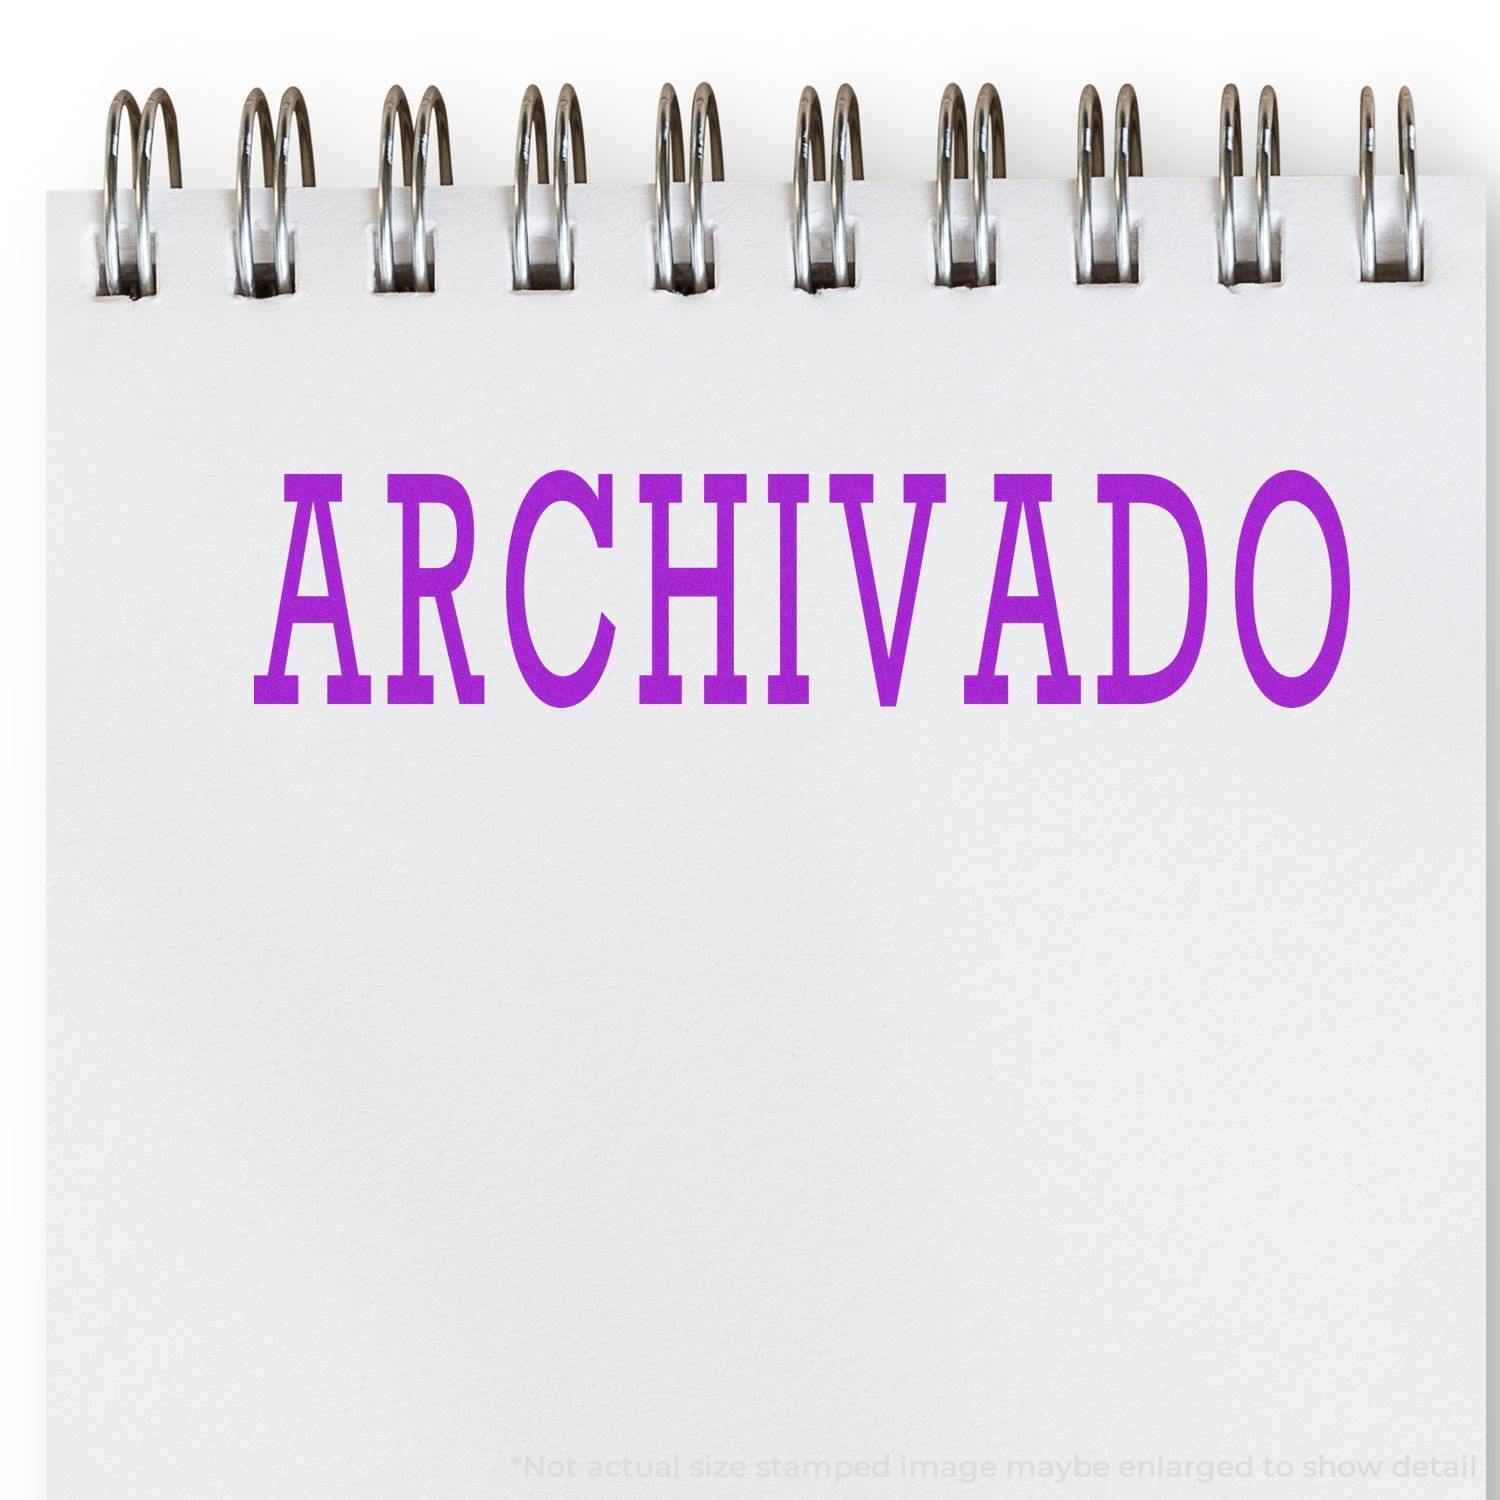 In Use Large Self-Inking Archivado Stamp Image